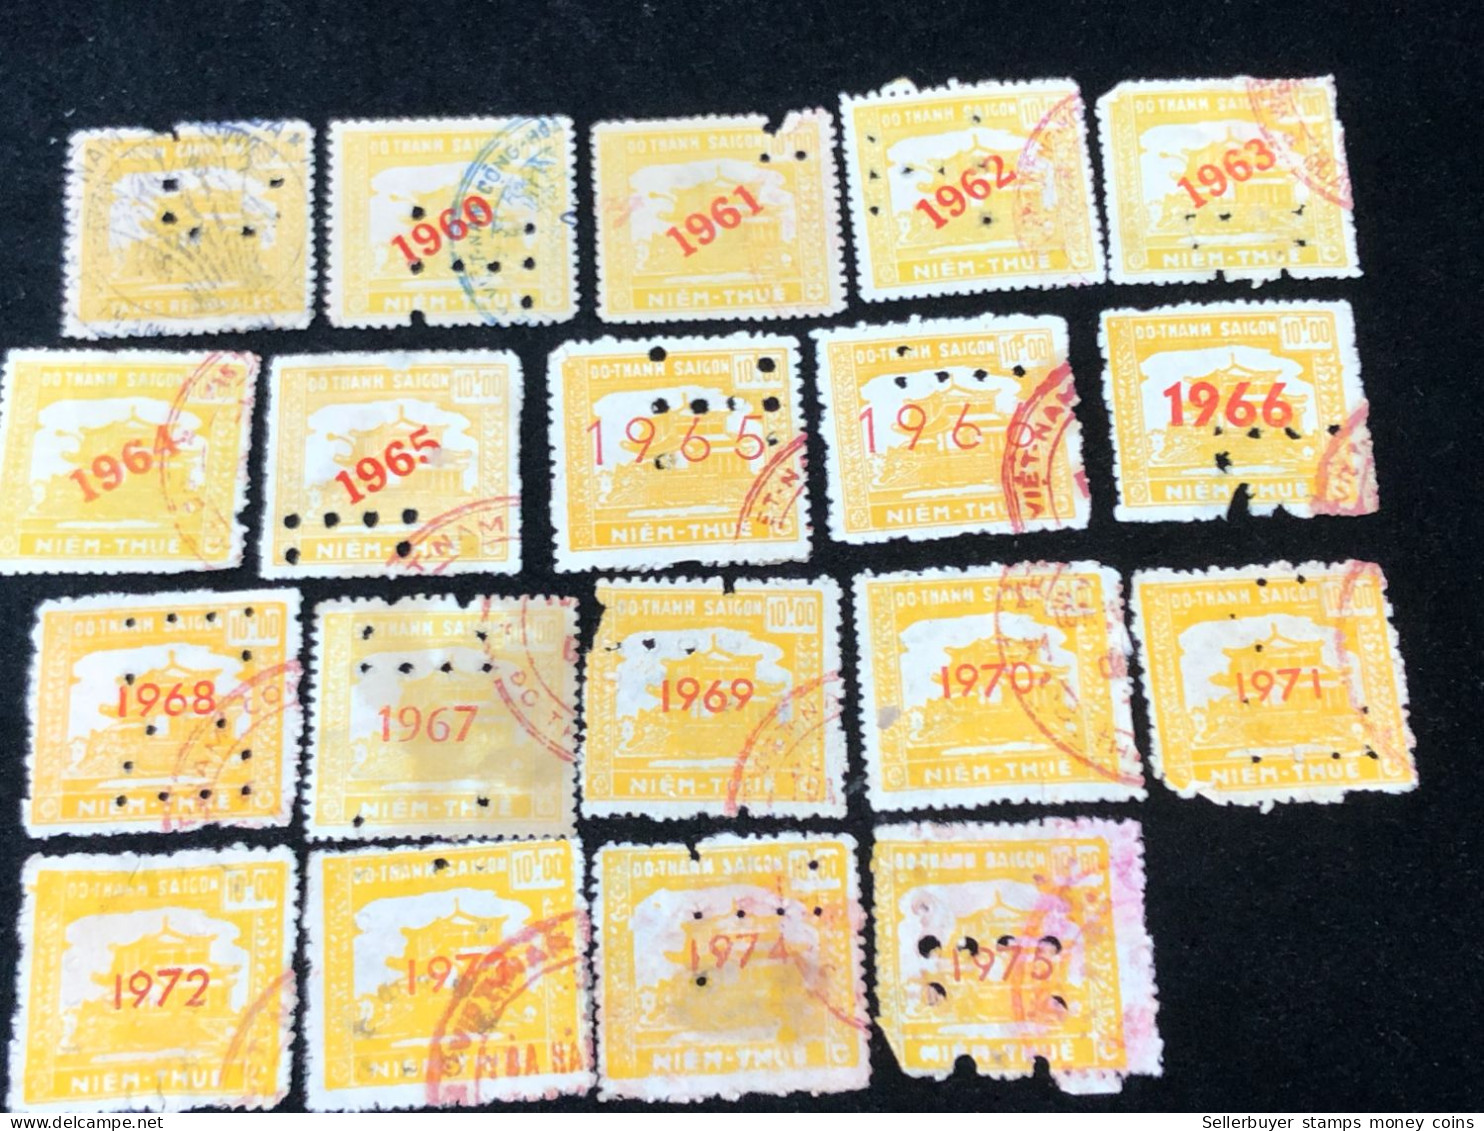 Vietnam South Wedge Before 1975( Wedge Has Been Used ) 19 Pcs 19 Stamps Quality Good - Sammlungen